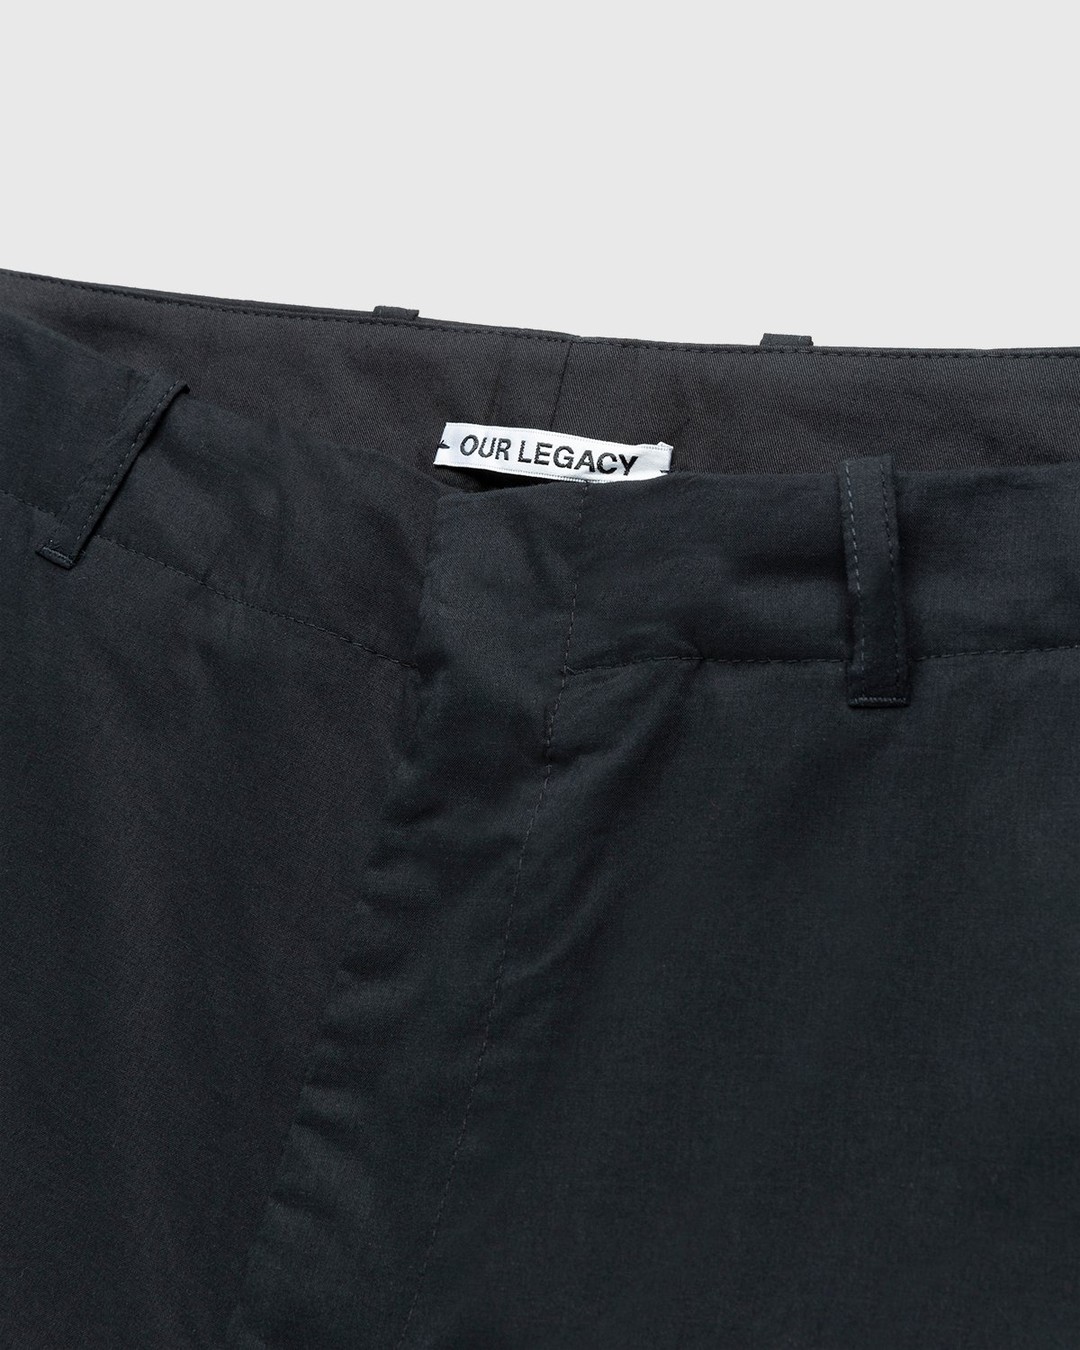 Our Legacy – Borrowed Chino Black Voile - Pants - Black - Image 3